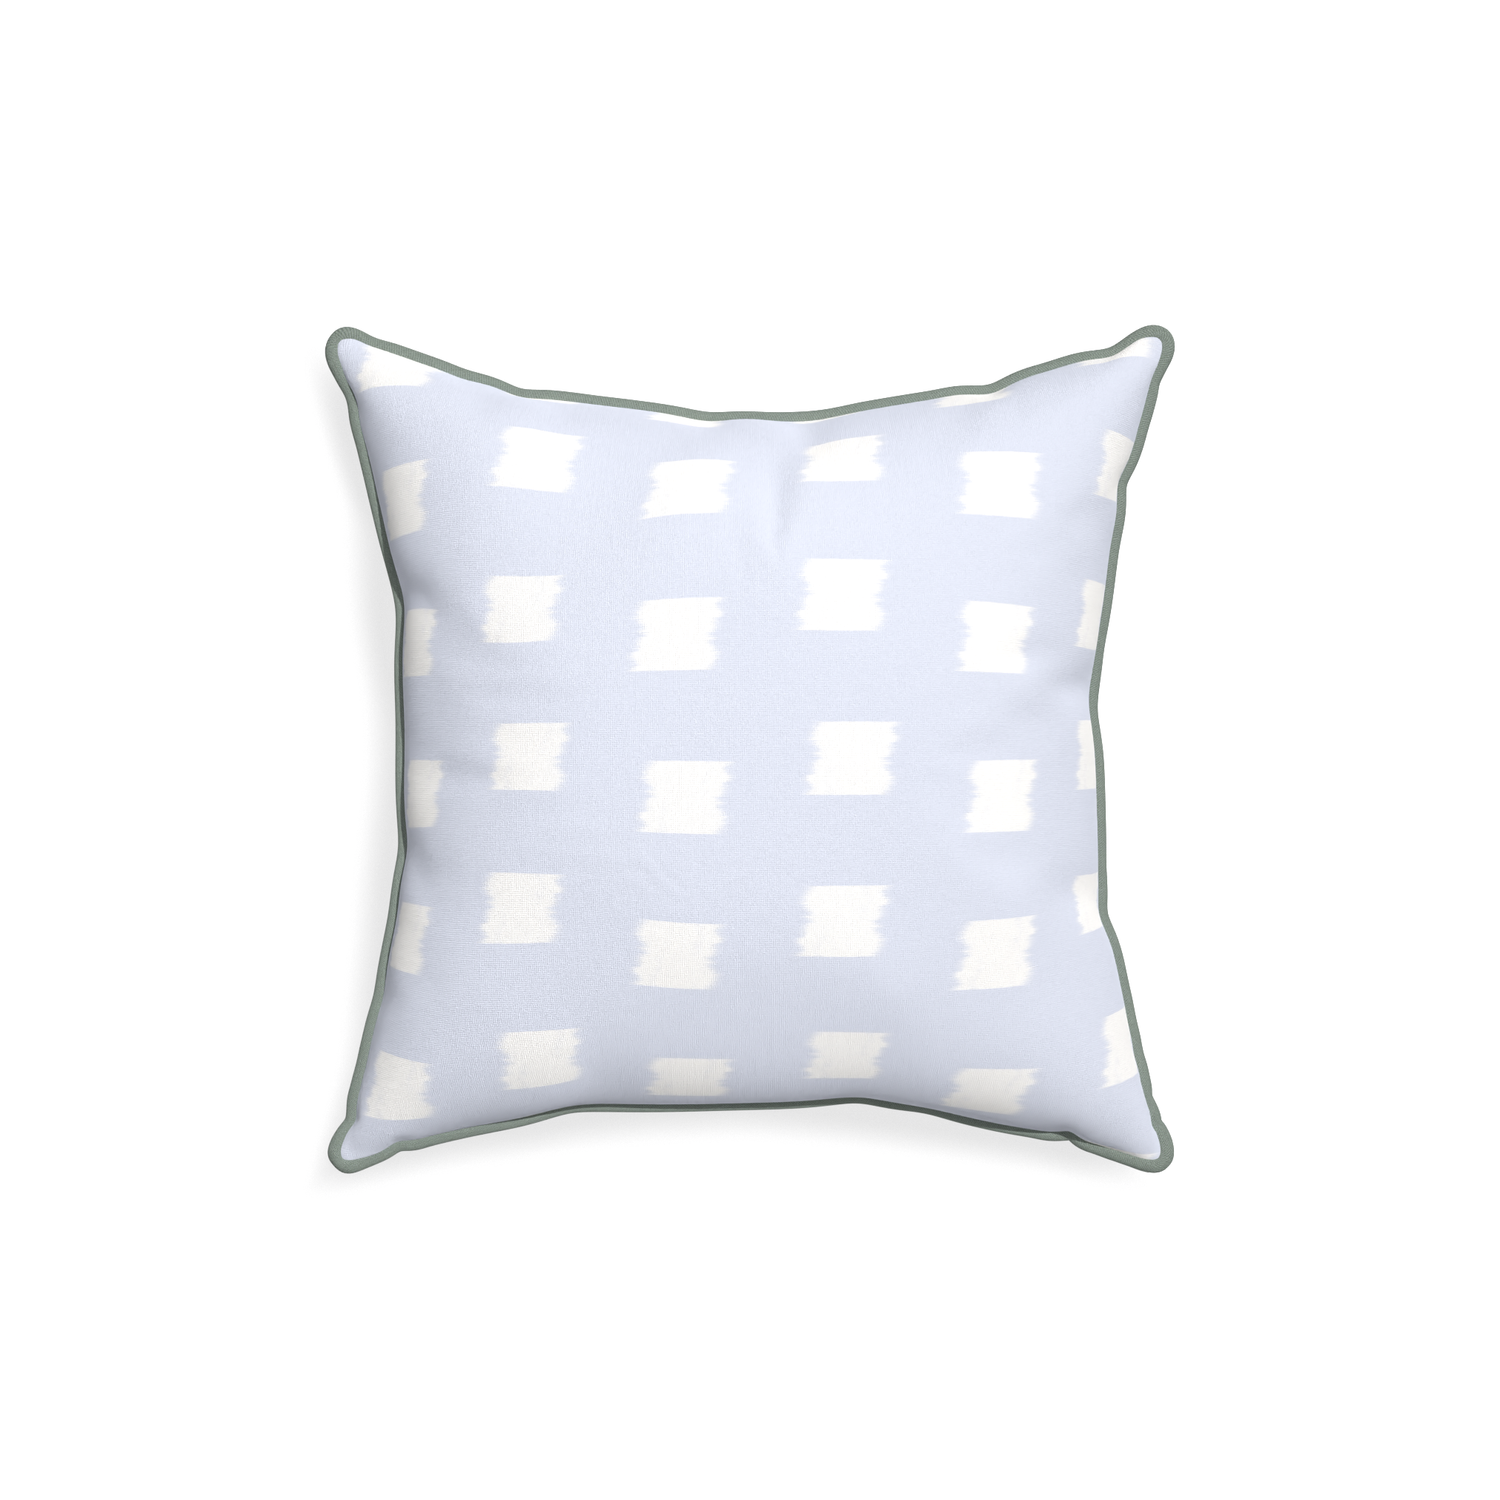 18-square denton custom sky blue patternpillow with sage piping on white background